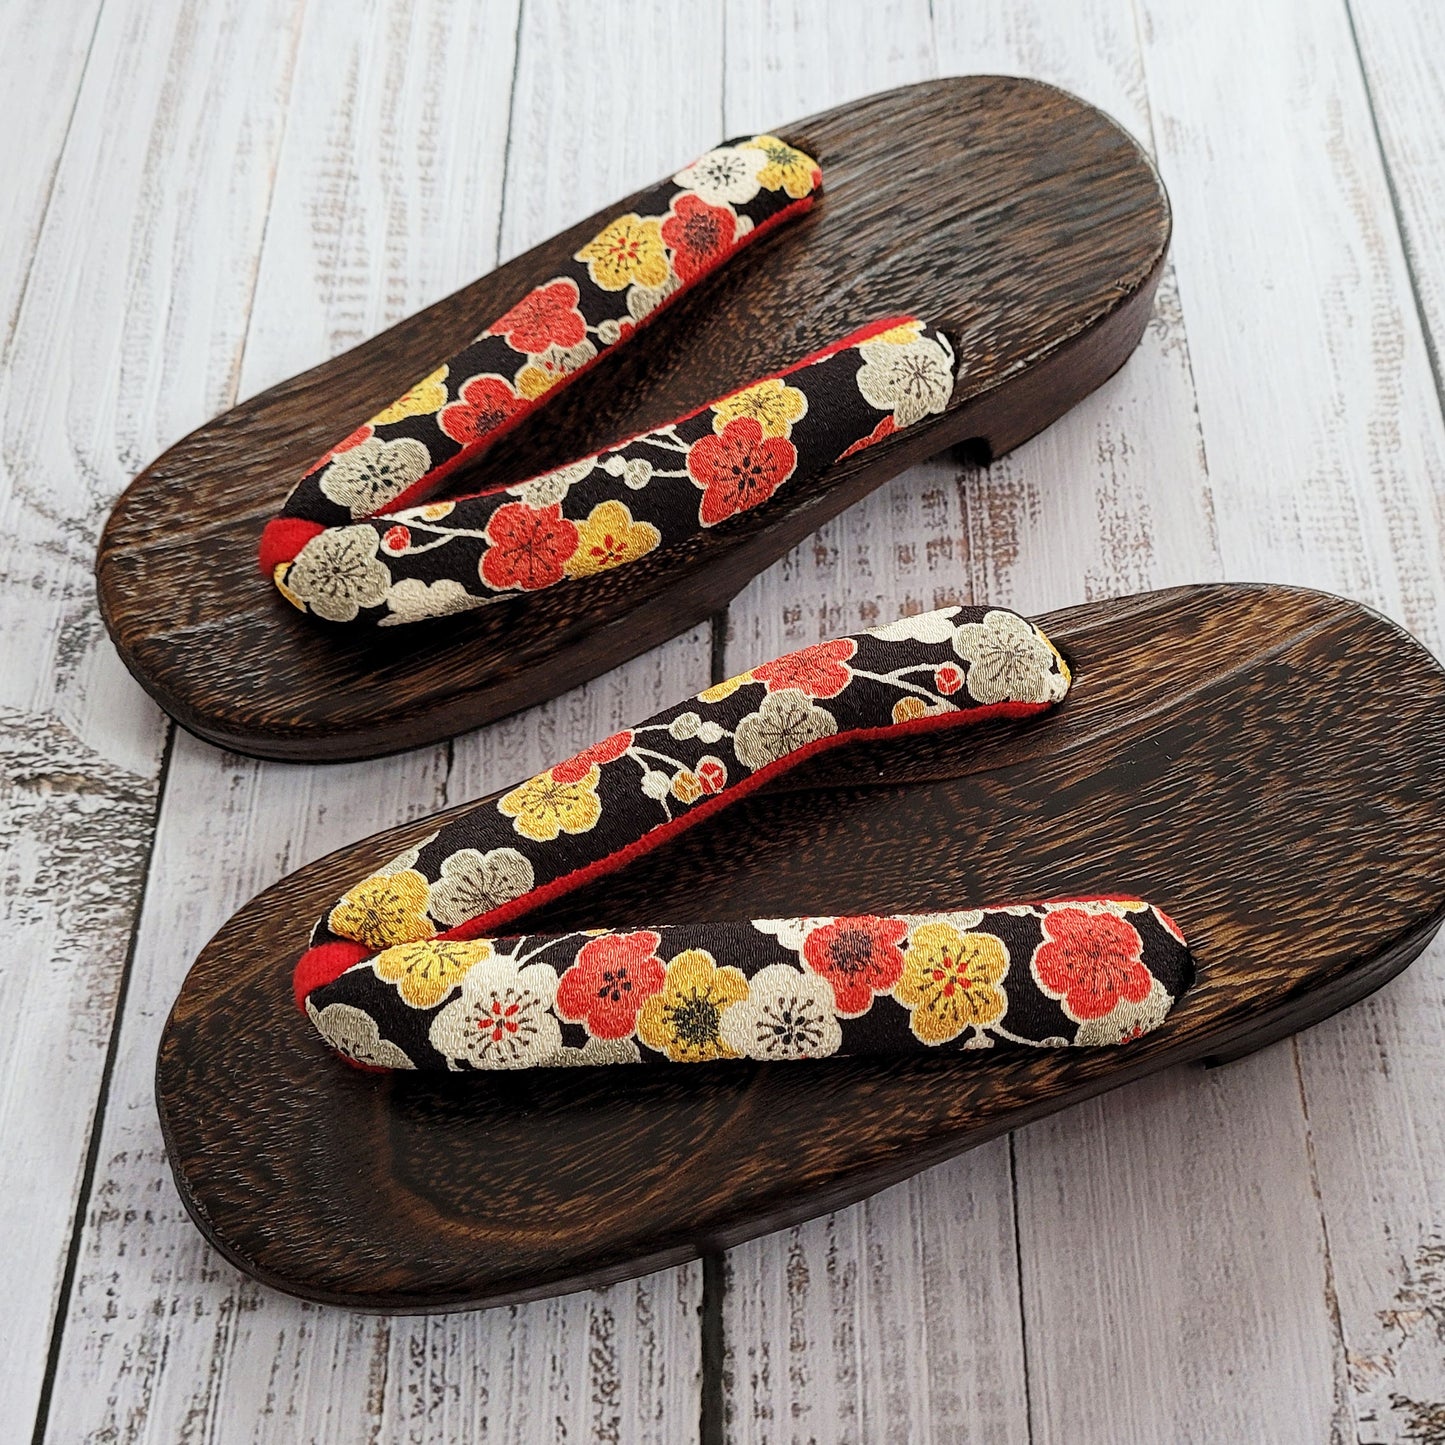 Geta Sandals for Women - Plum Blossoms in Black ( Discontinued )